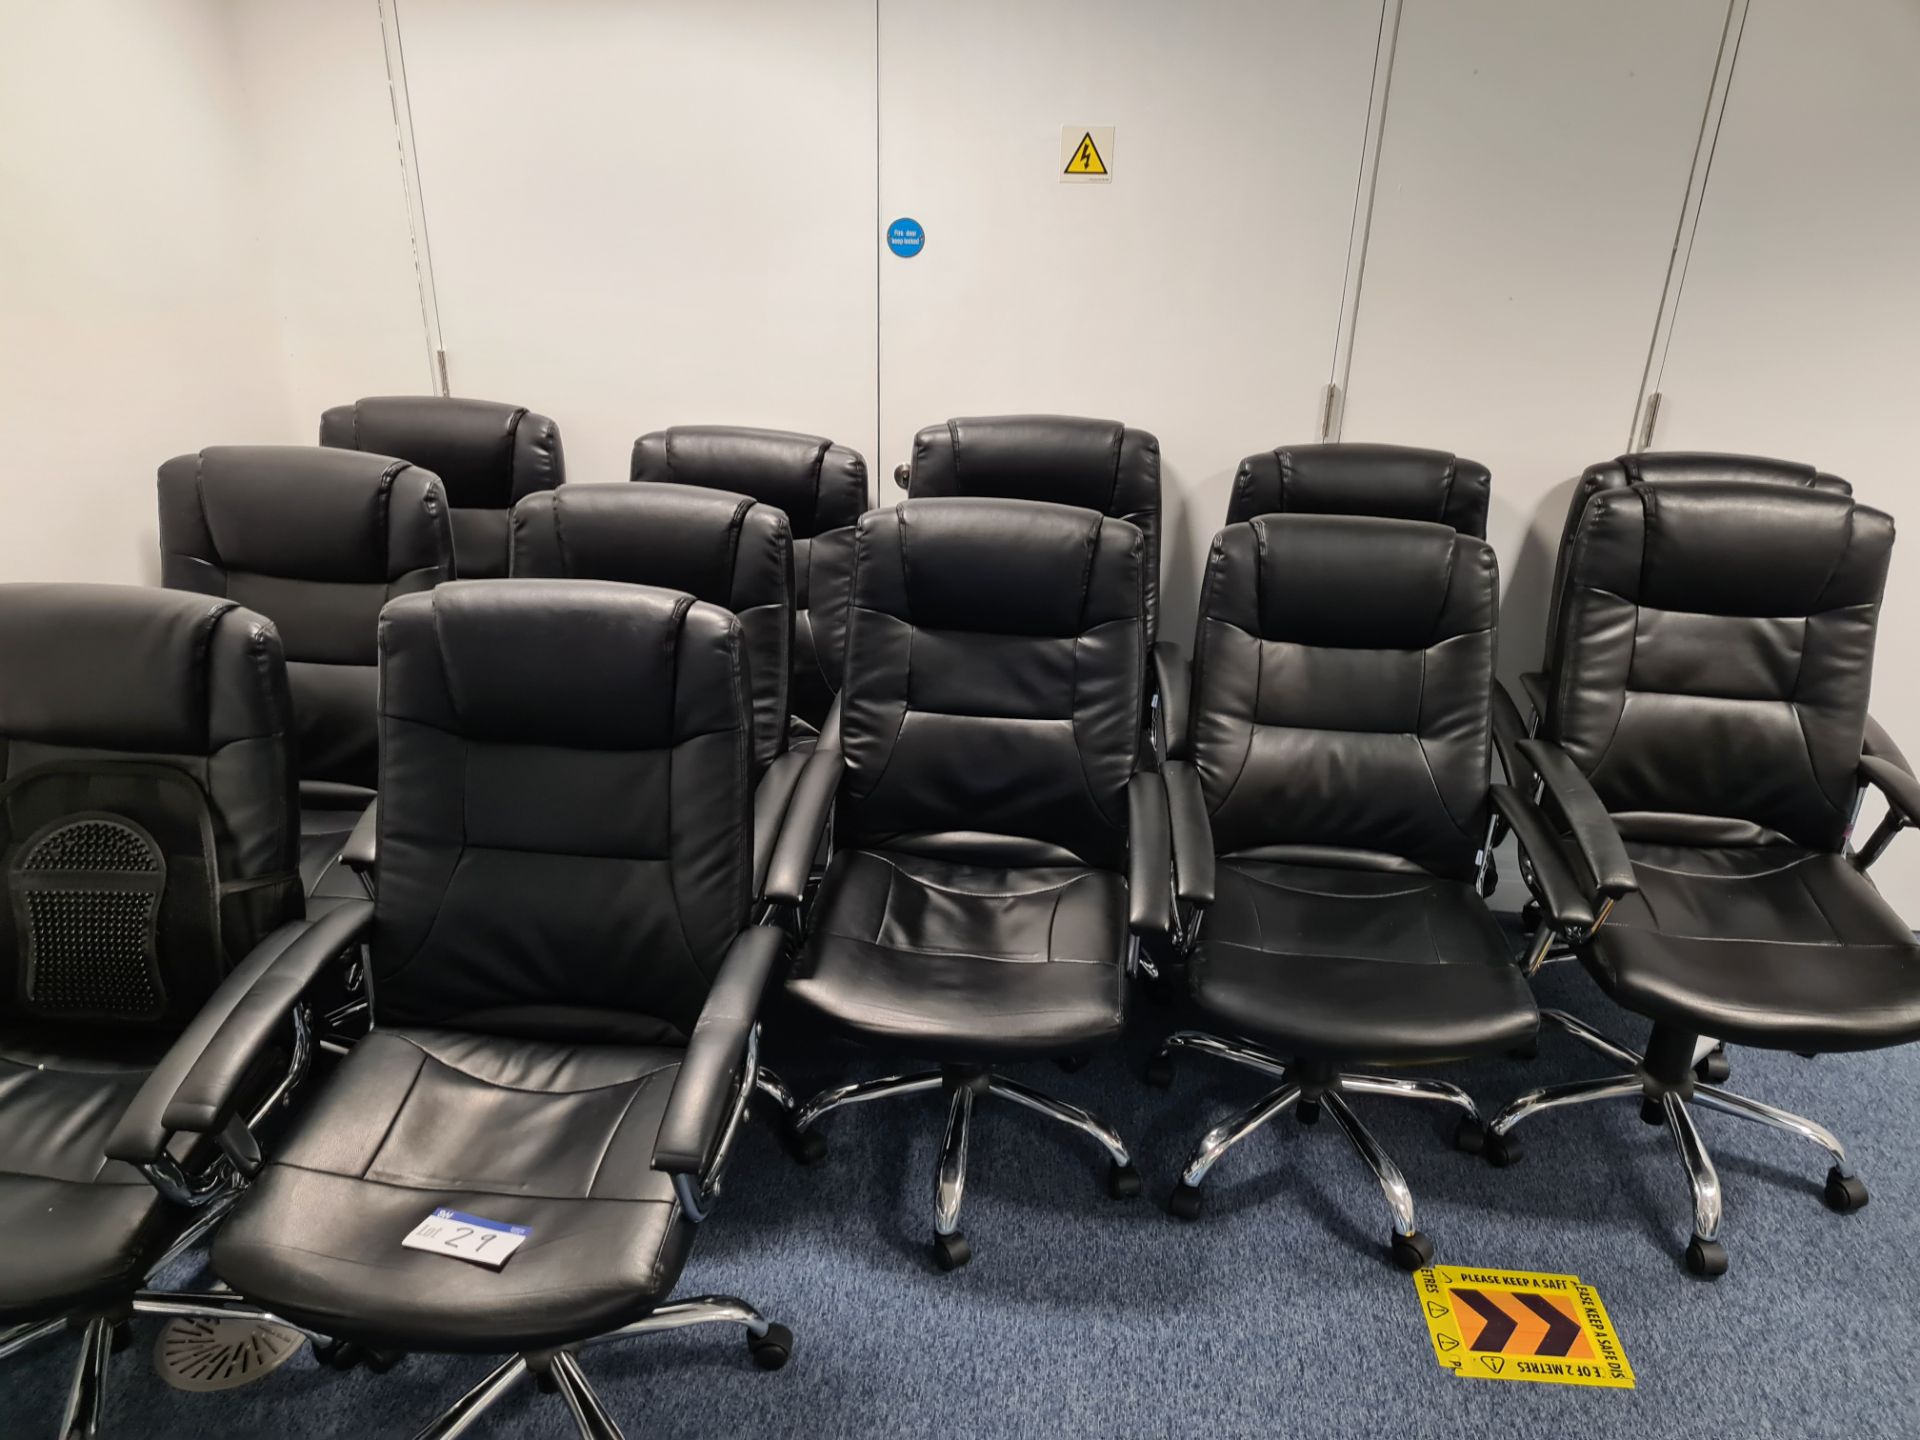 Ten leather swivel armchairs (Located at Q2 Light